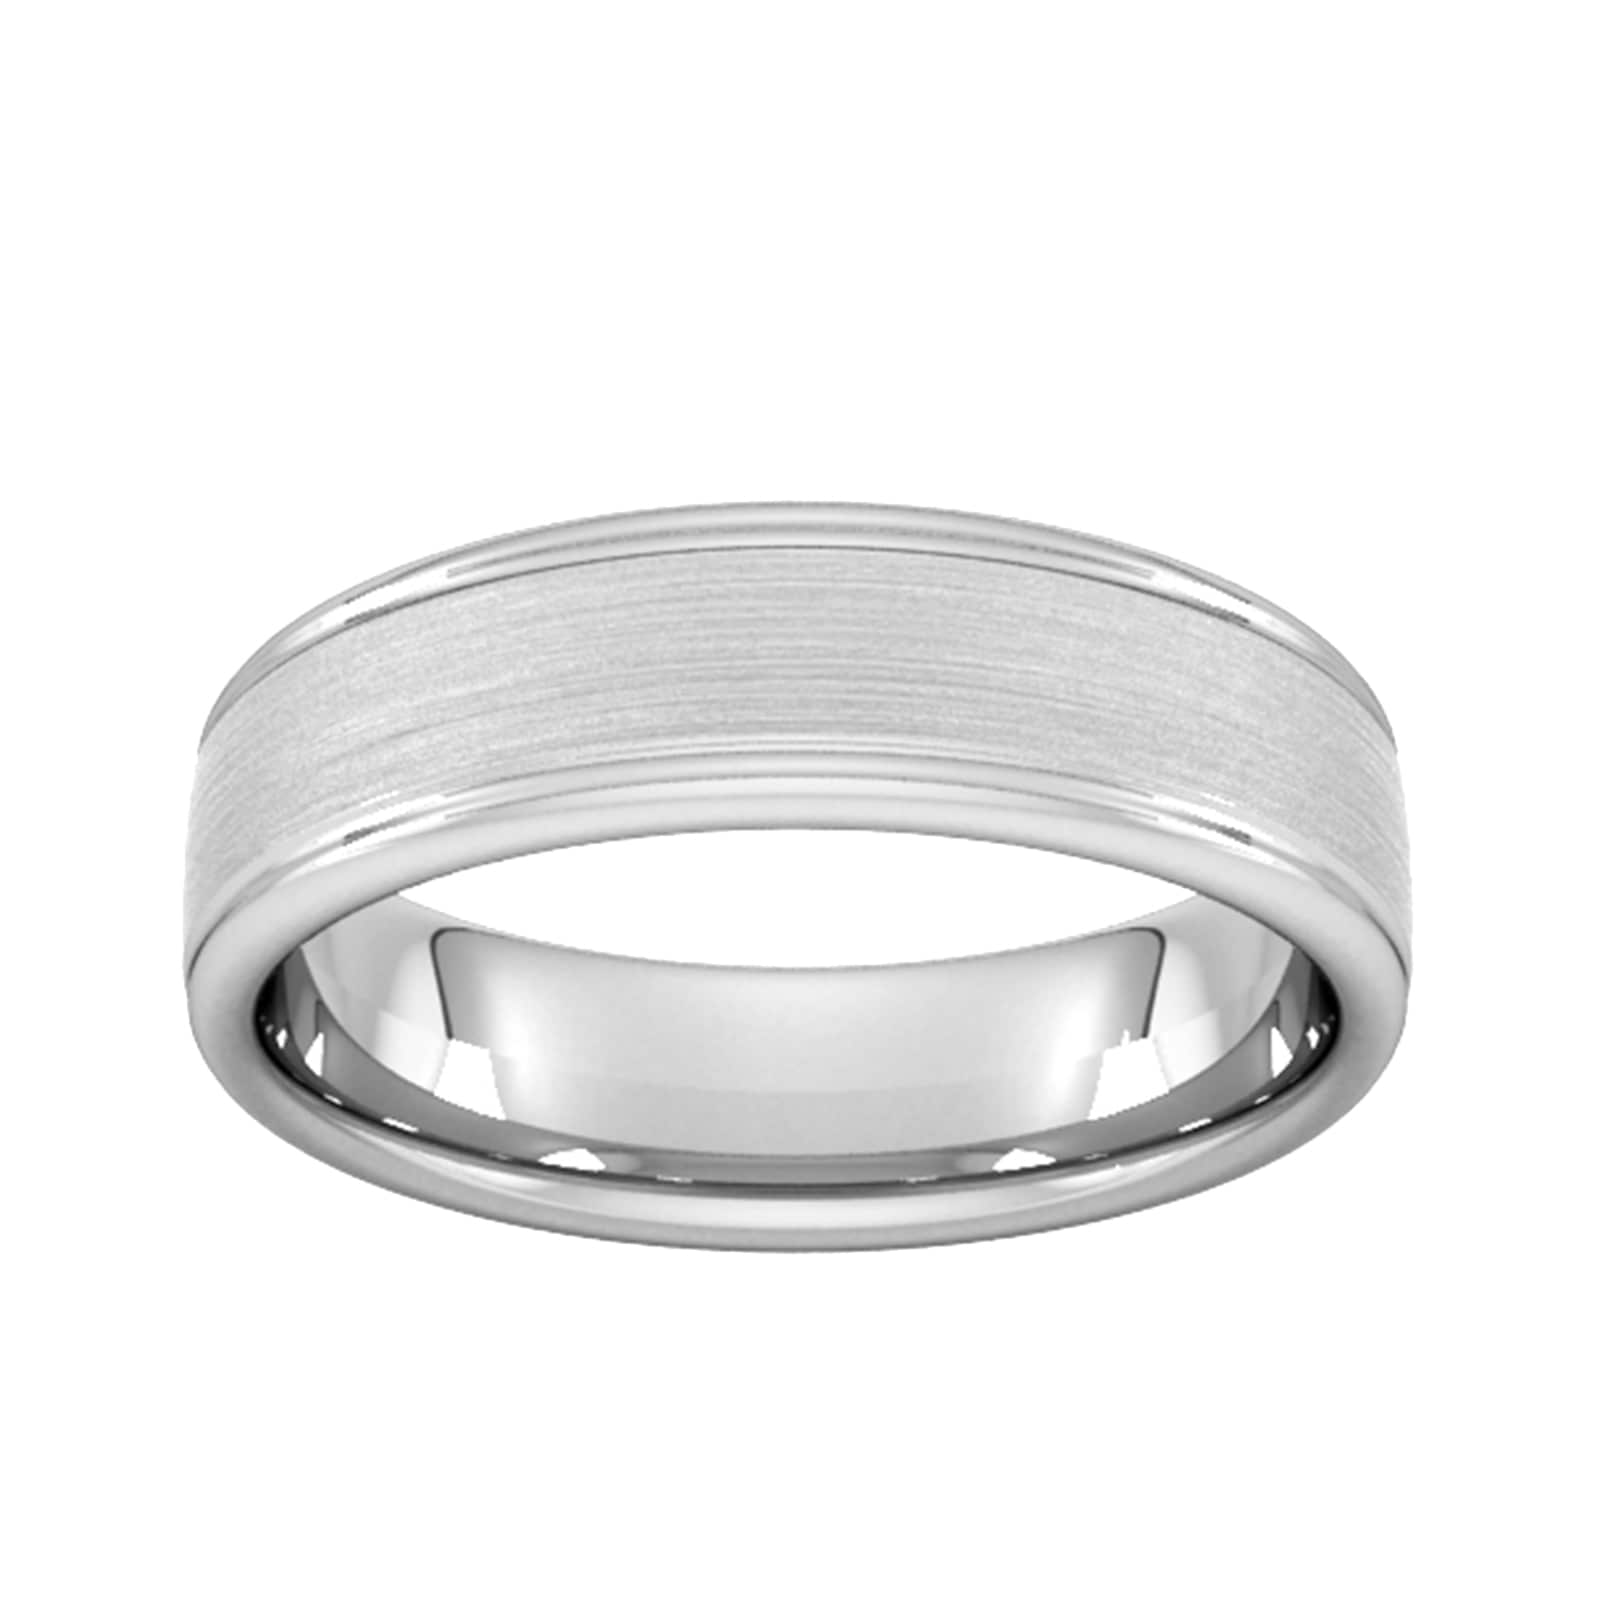 6mm D Shape Heavy Matt Centre With Grooves Wedding Ring In 18 Carat White Gold - Ring Size T